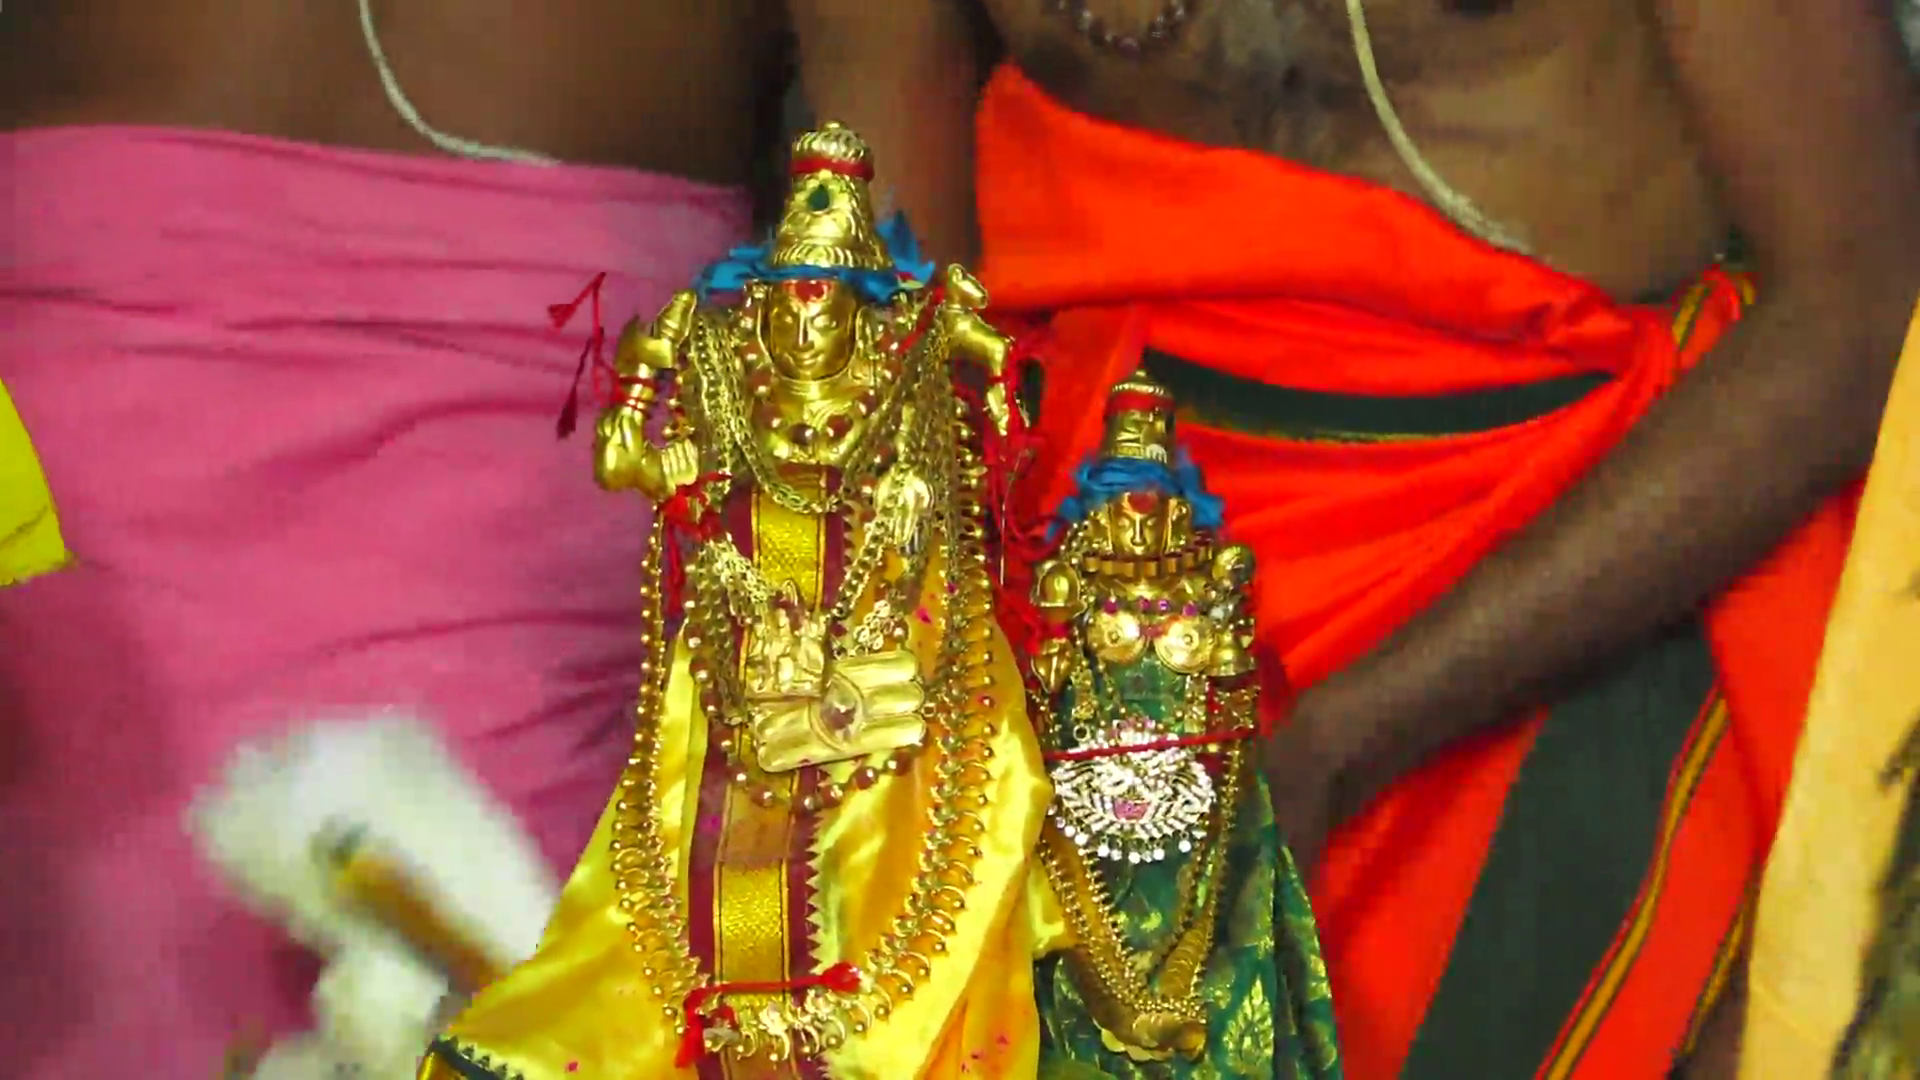 shiva parvathula marriage fair held in grand way in vemulawada temple